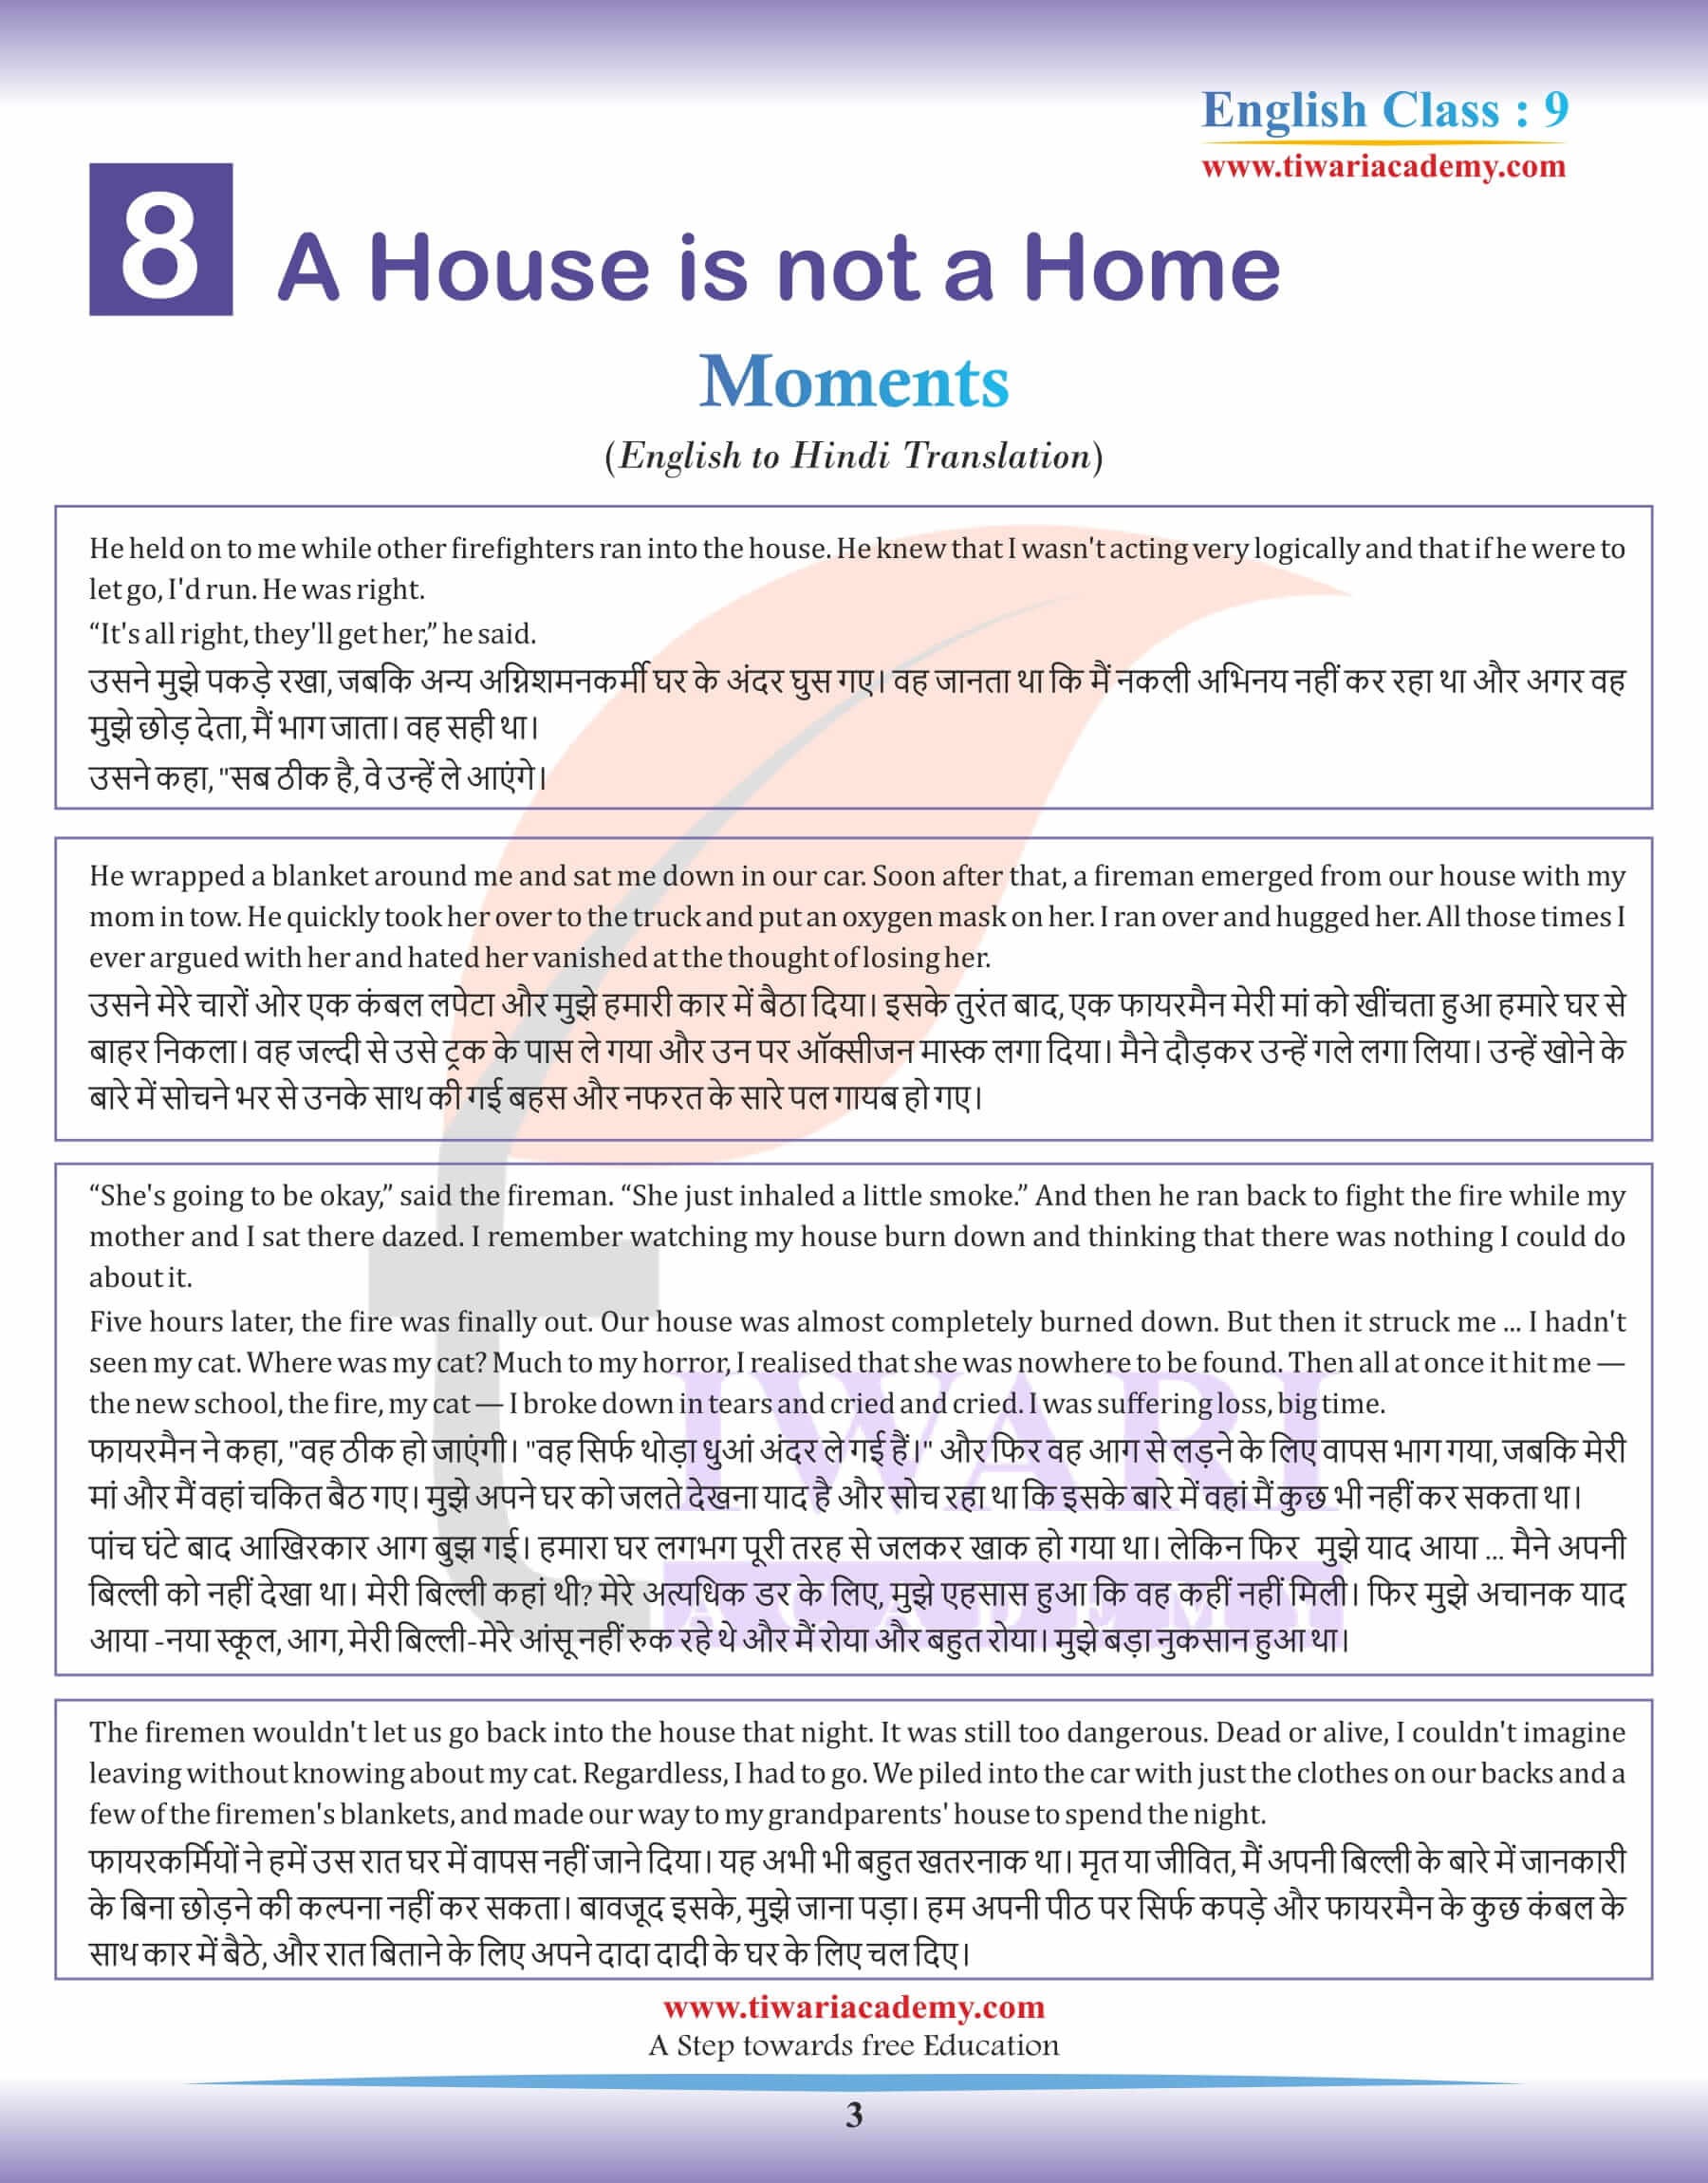 Class 9 English Moments Chapter 8 a House is Not a Home in Hindi